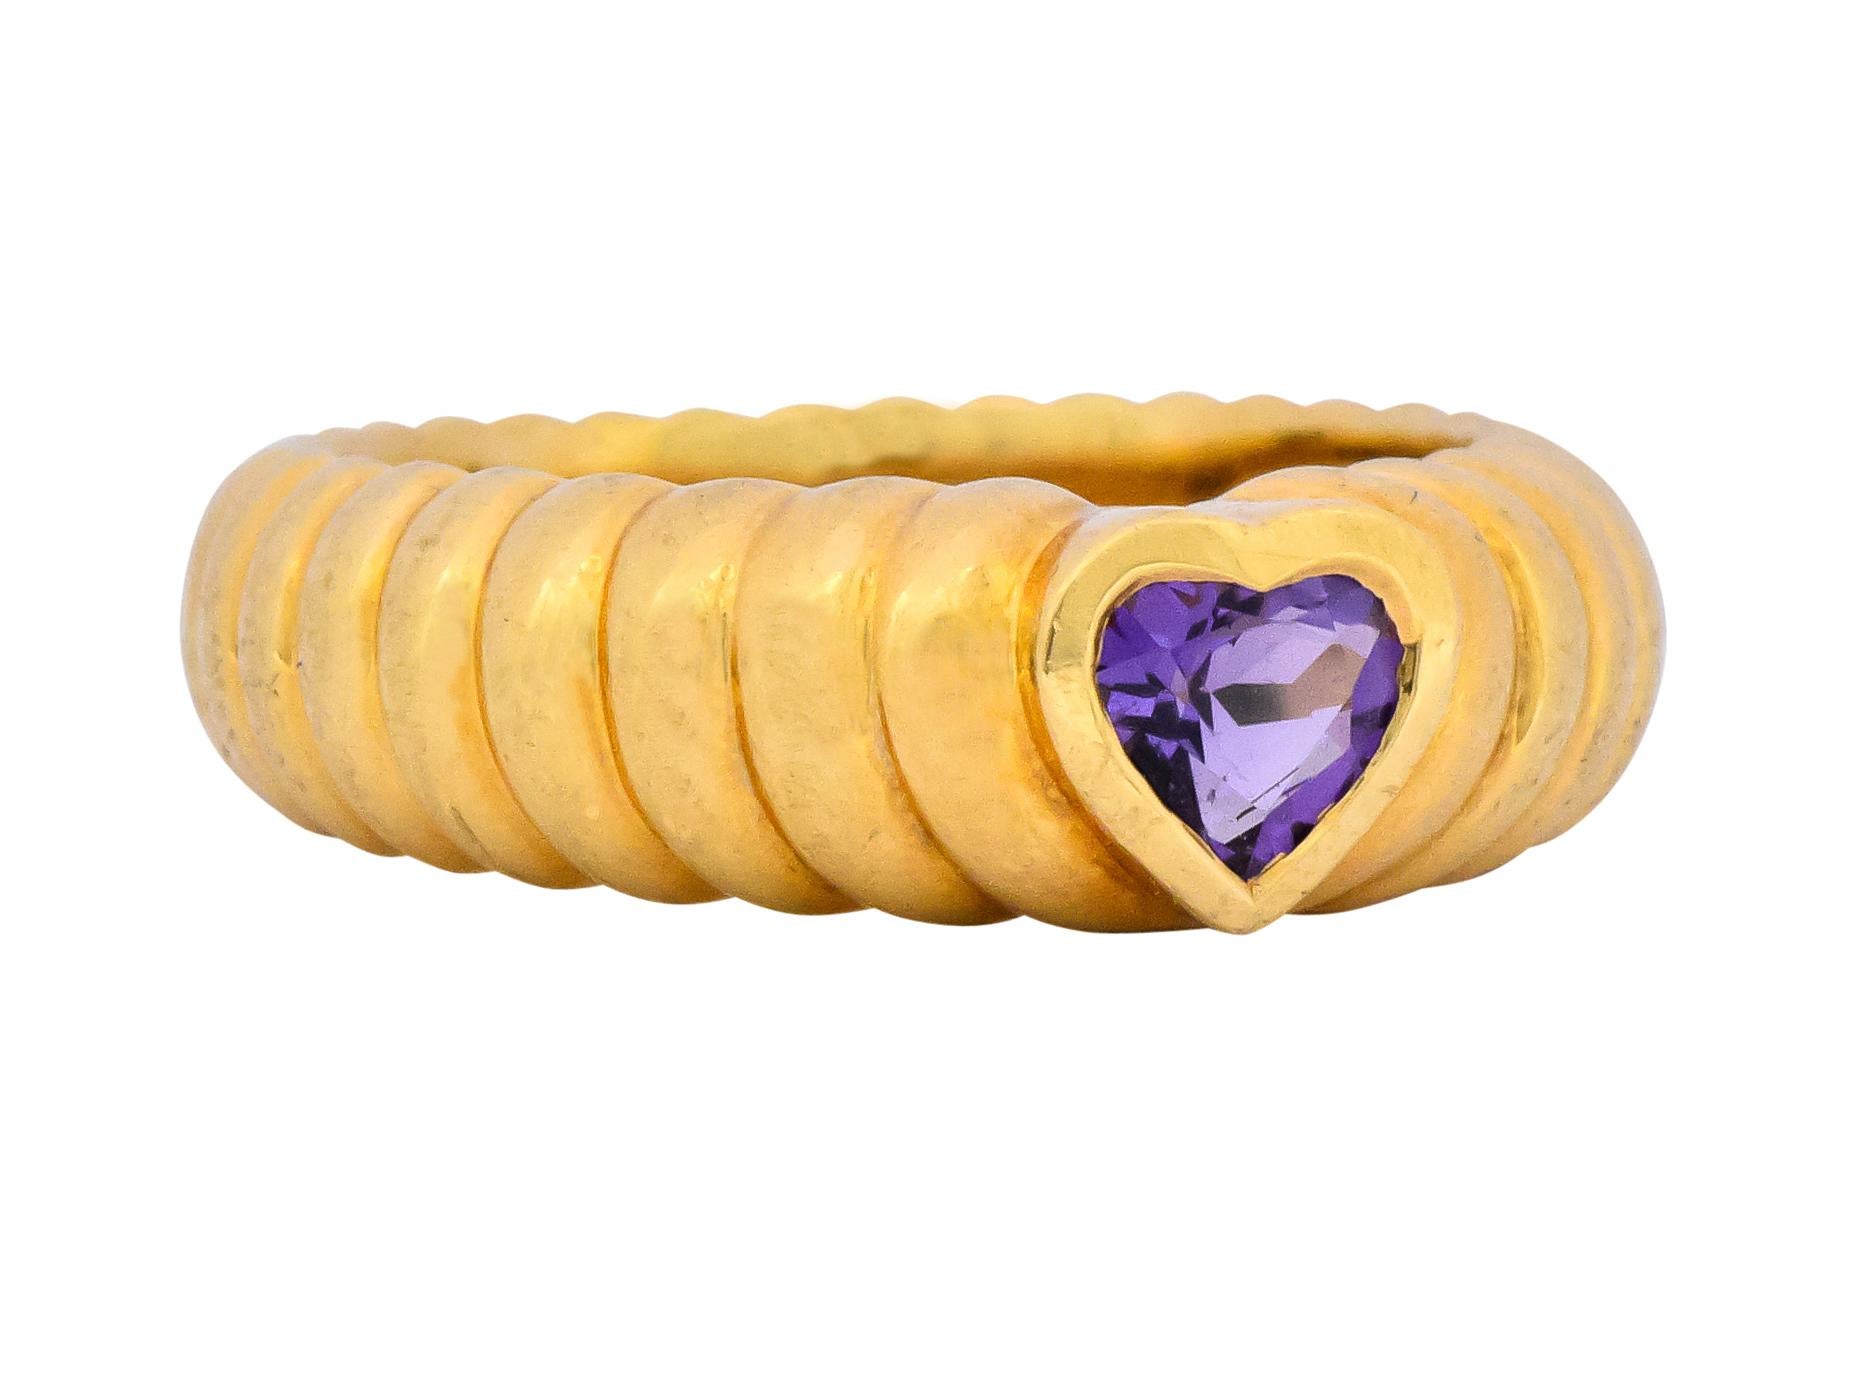 Centering a heart shaped amethyst, measuring approximately 5.2 x 5.3 mm, bright medium purple

Bezel set in high polished gold

With a polished fluted gold shank

Fully signed Tiffany & Co. and stamped 750 for 18 karat gold

Ring Size: 7 & not